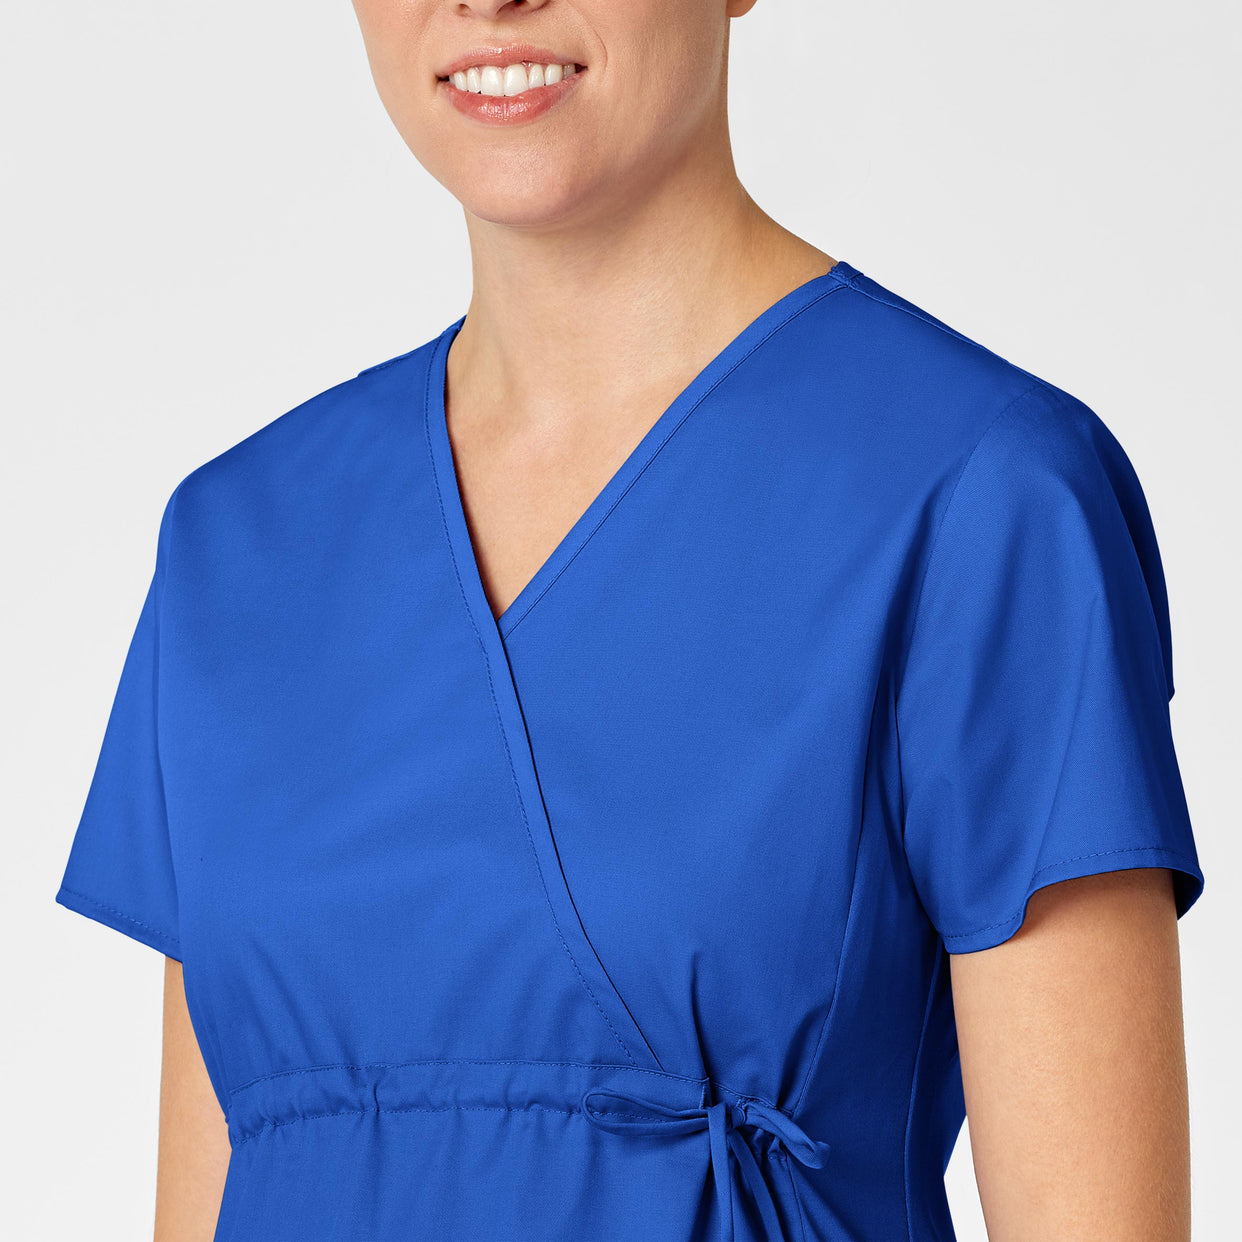 royal maternity scrub top from Wink scrubs